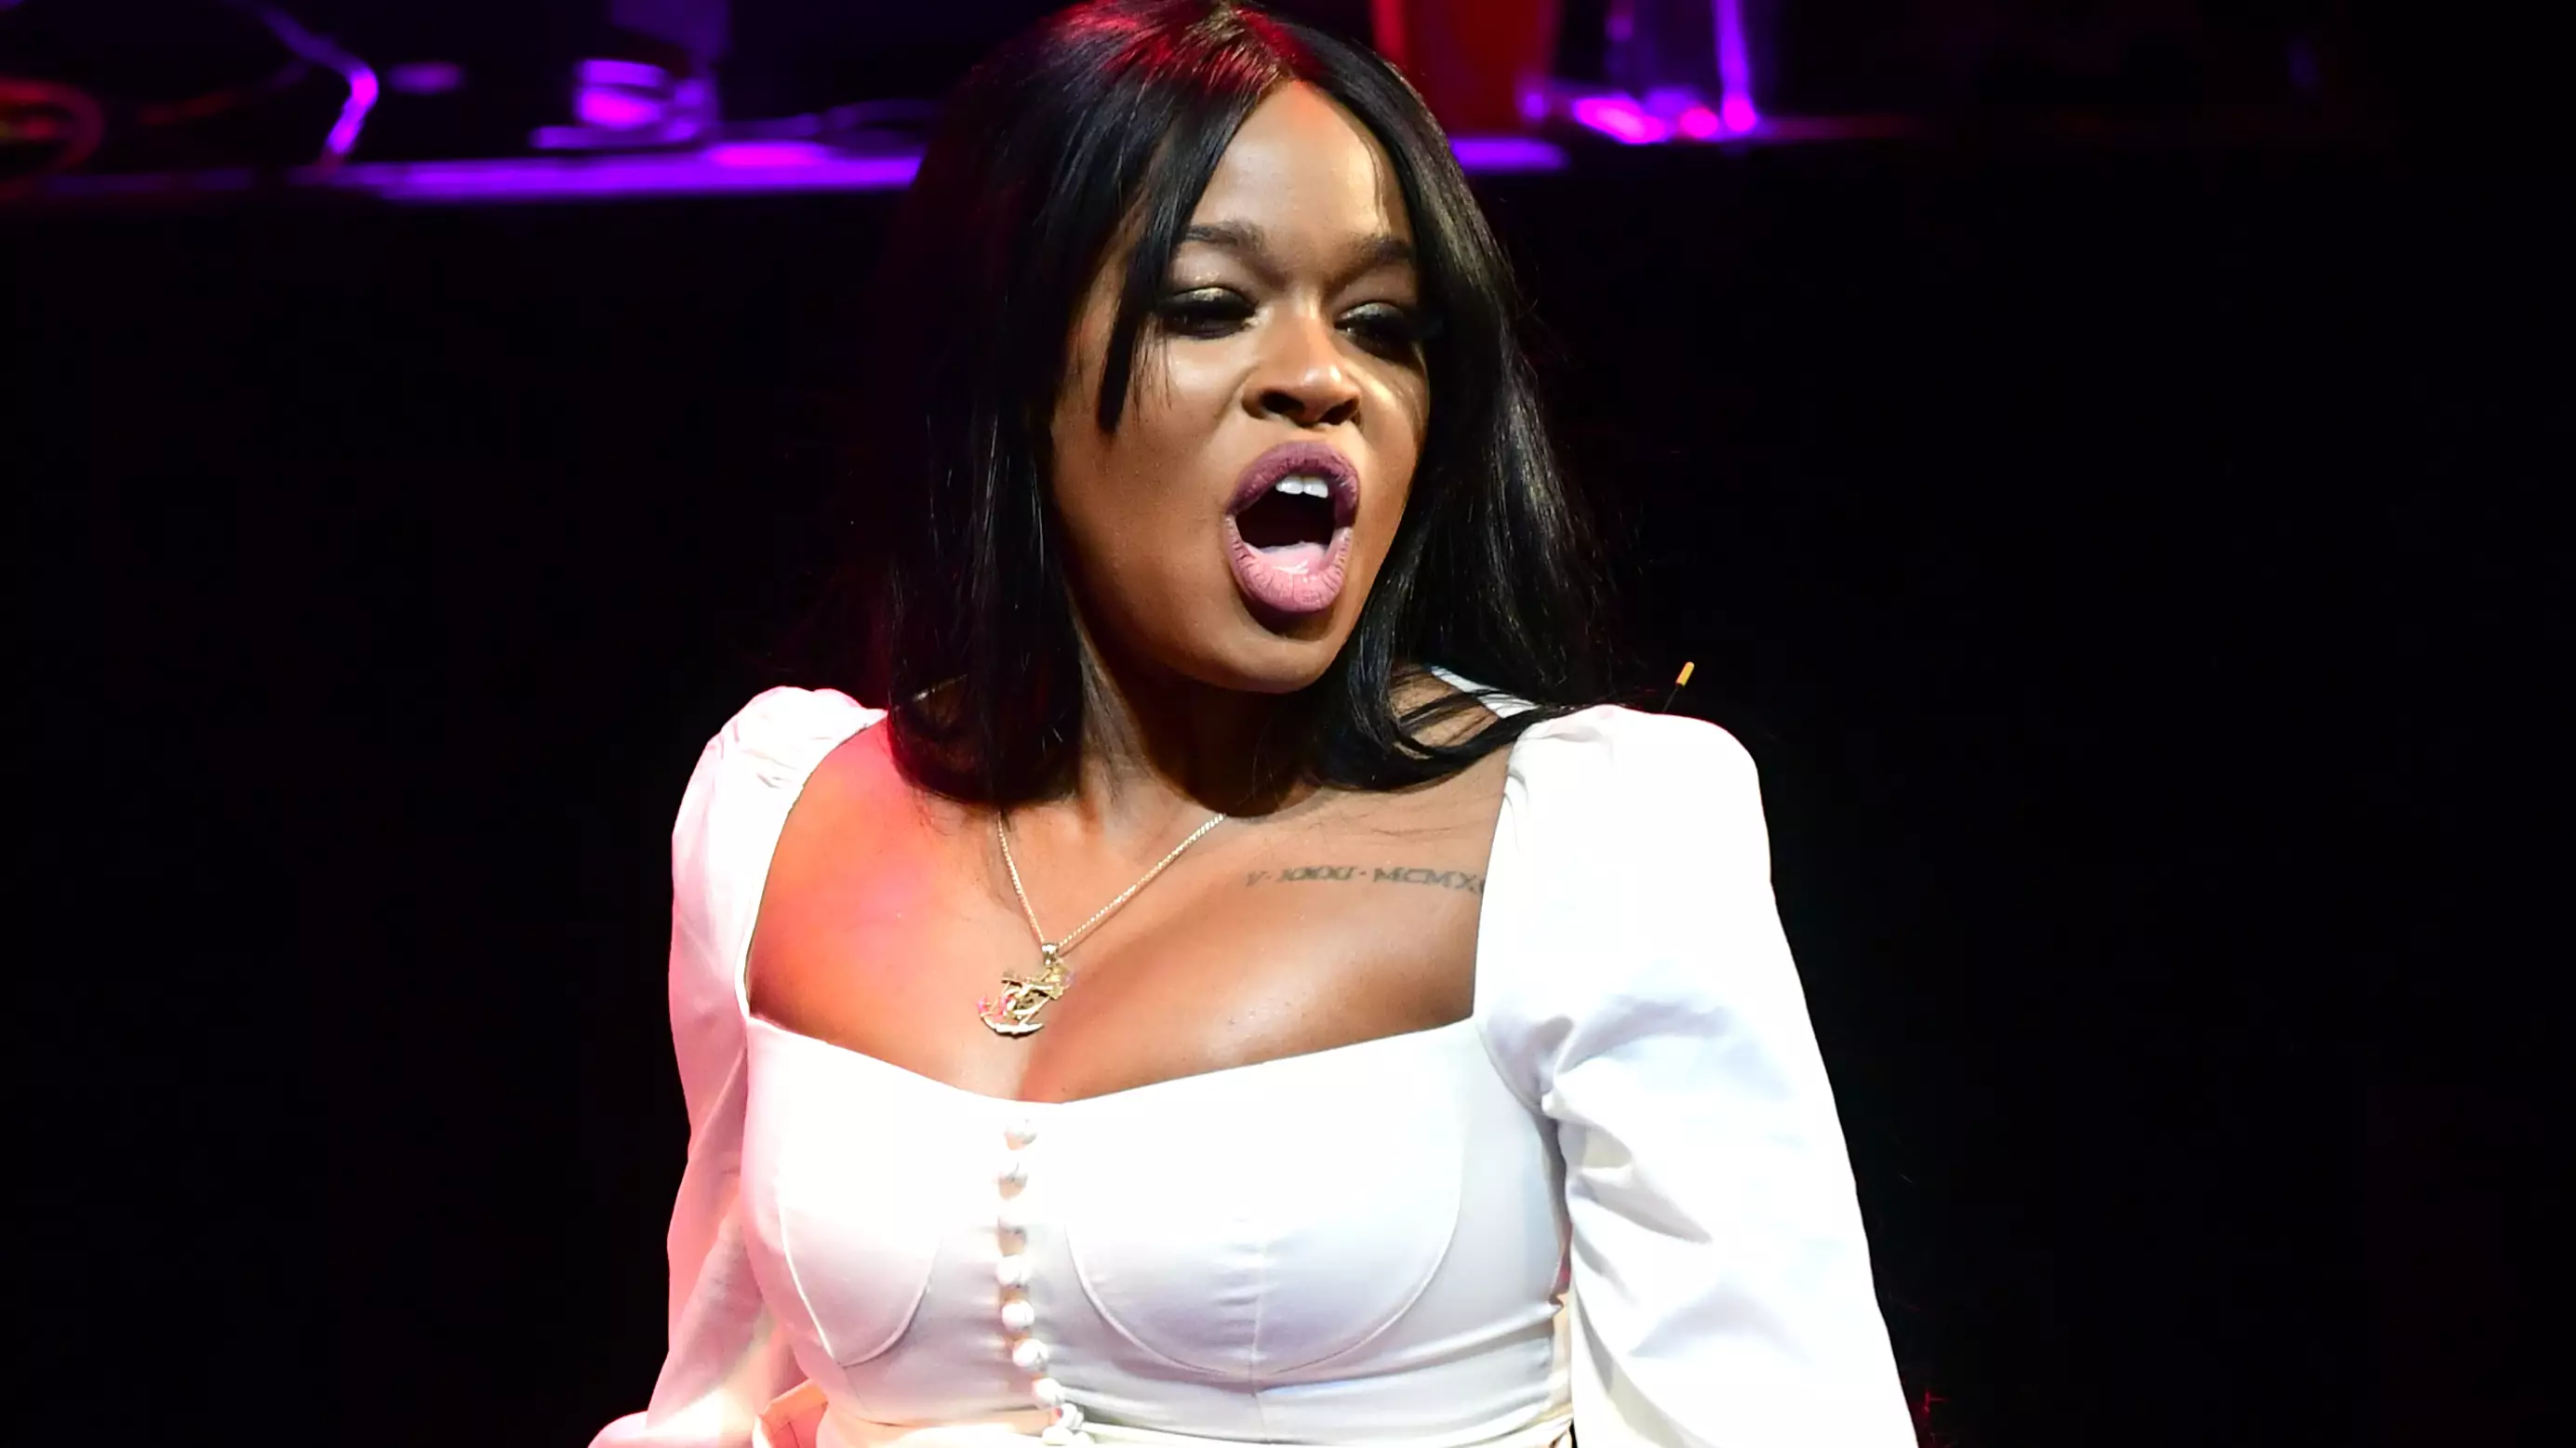 Azealia Banks Wants To Give Birth To 'Black Demon Entity' With Kanye West